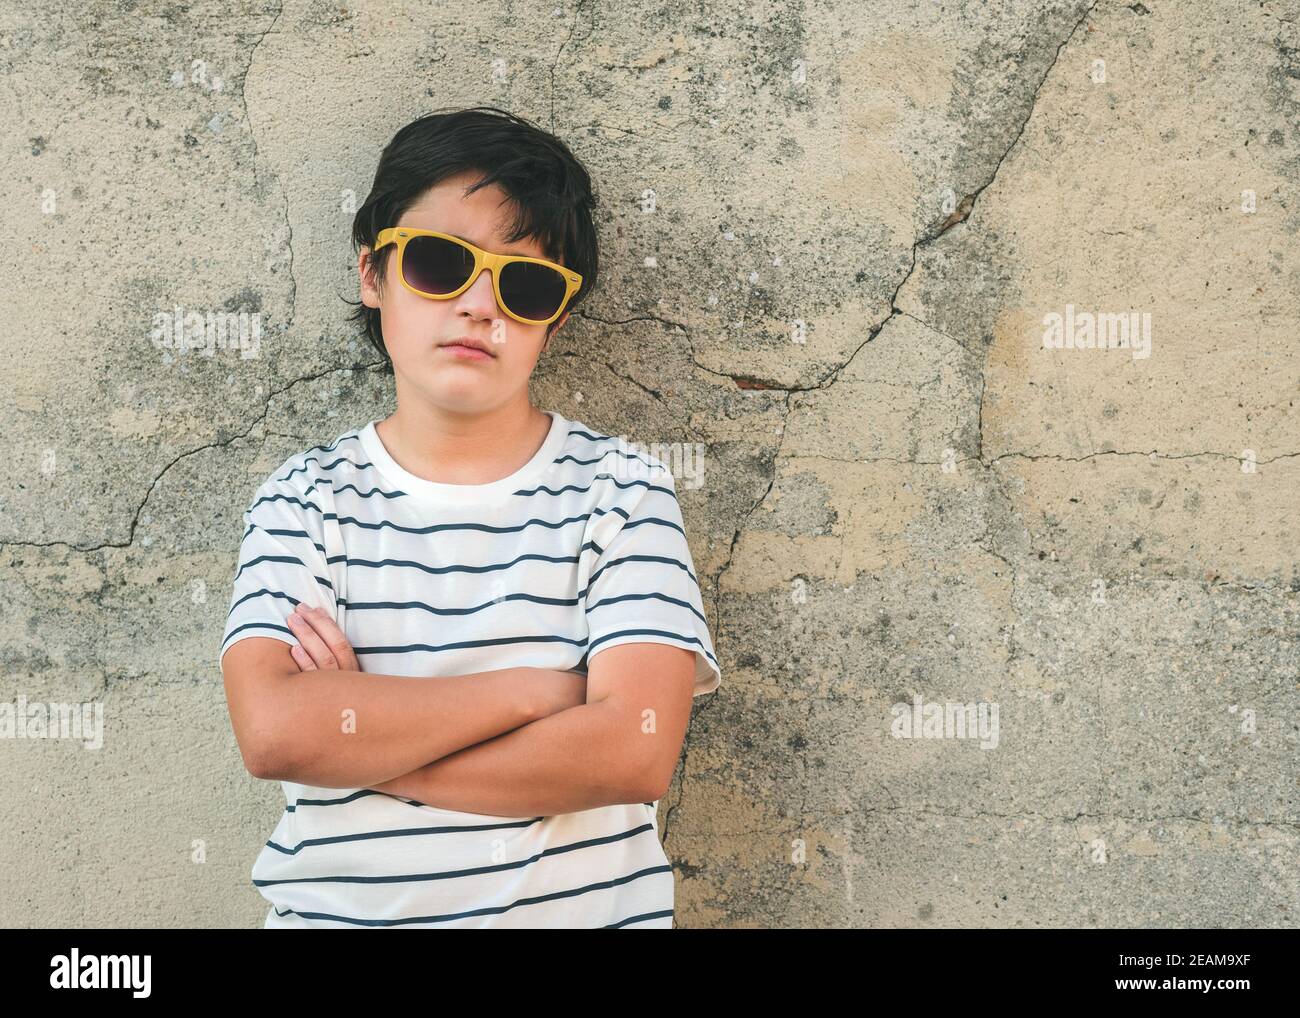 rebellious boy with sunglasses next to a wall outdoors Stock Photo